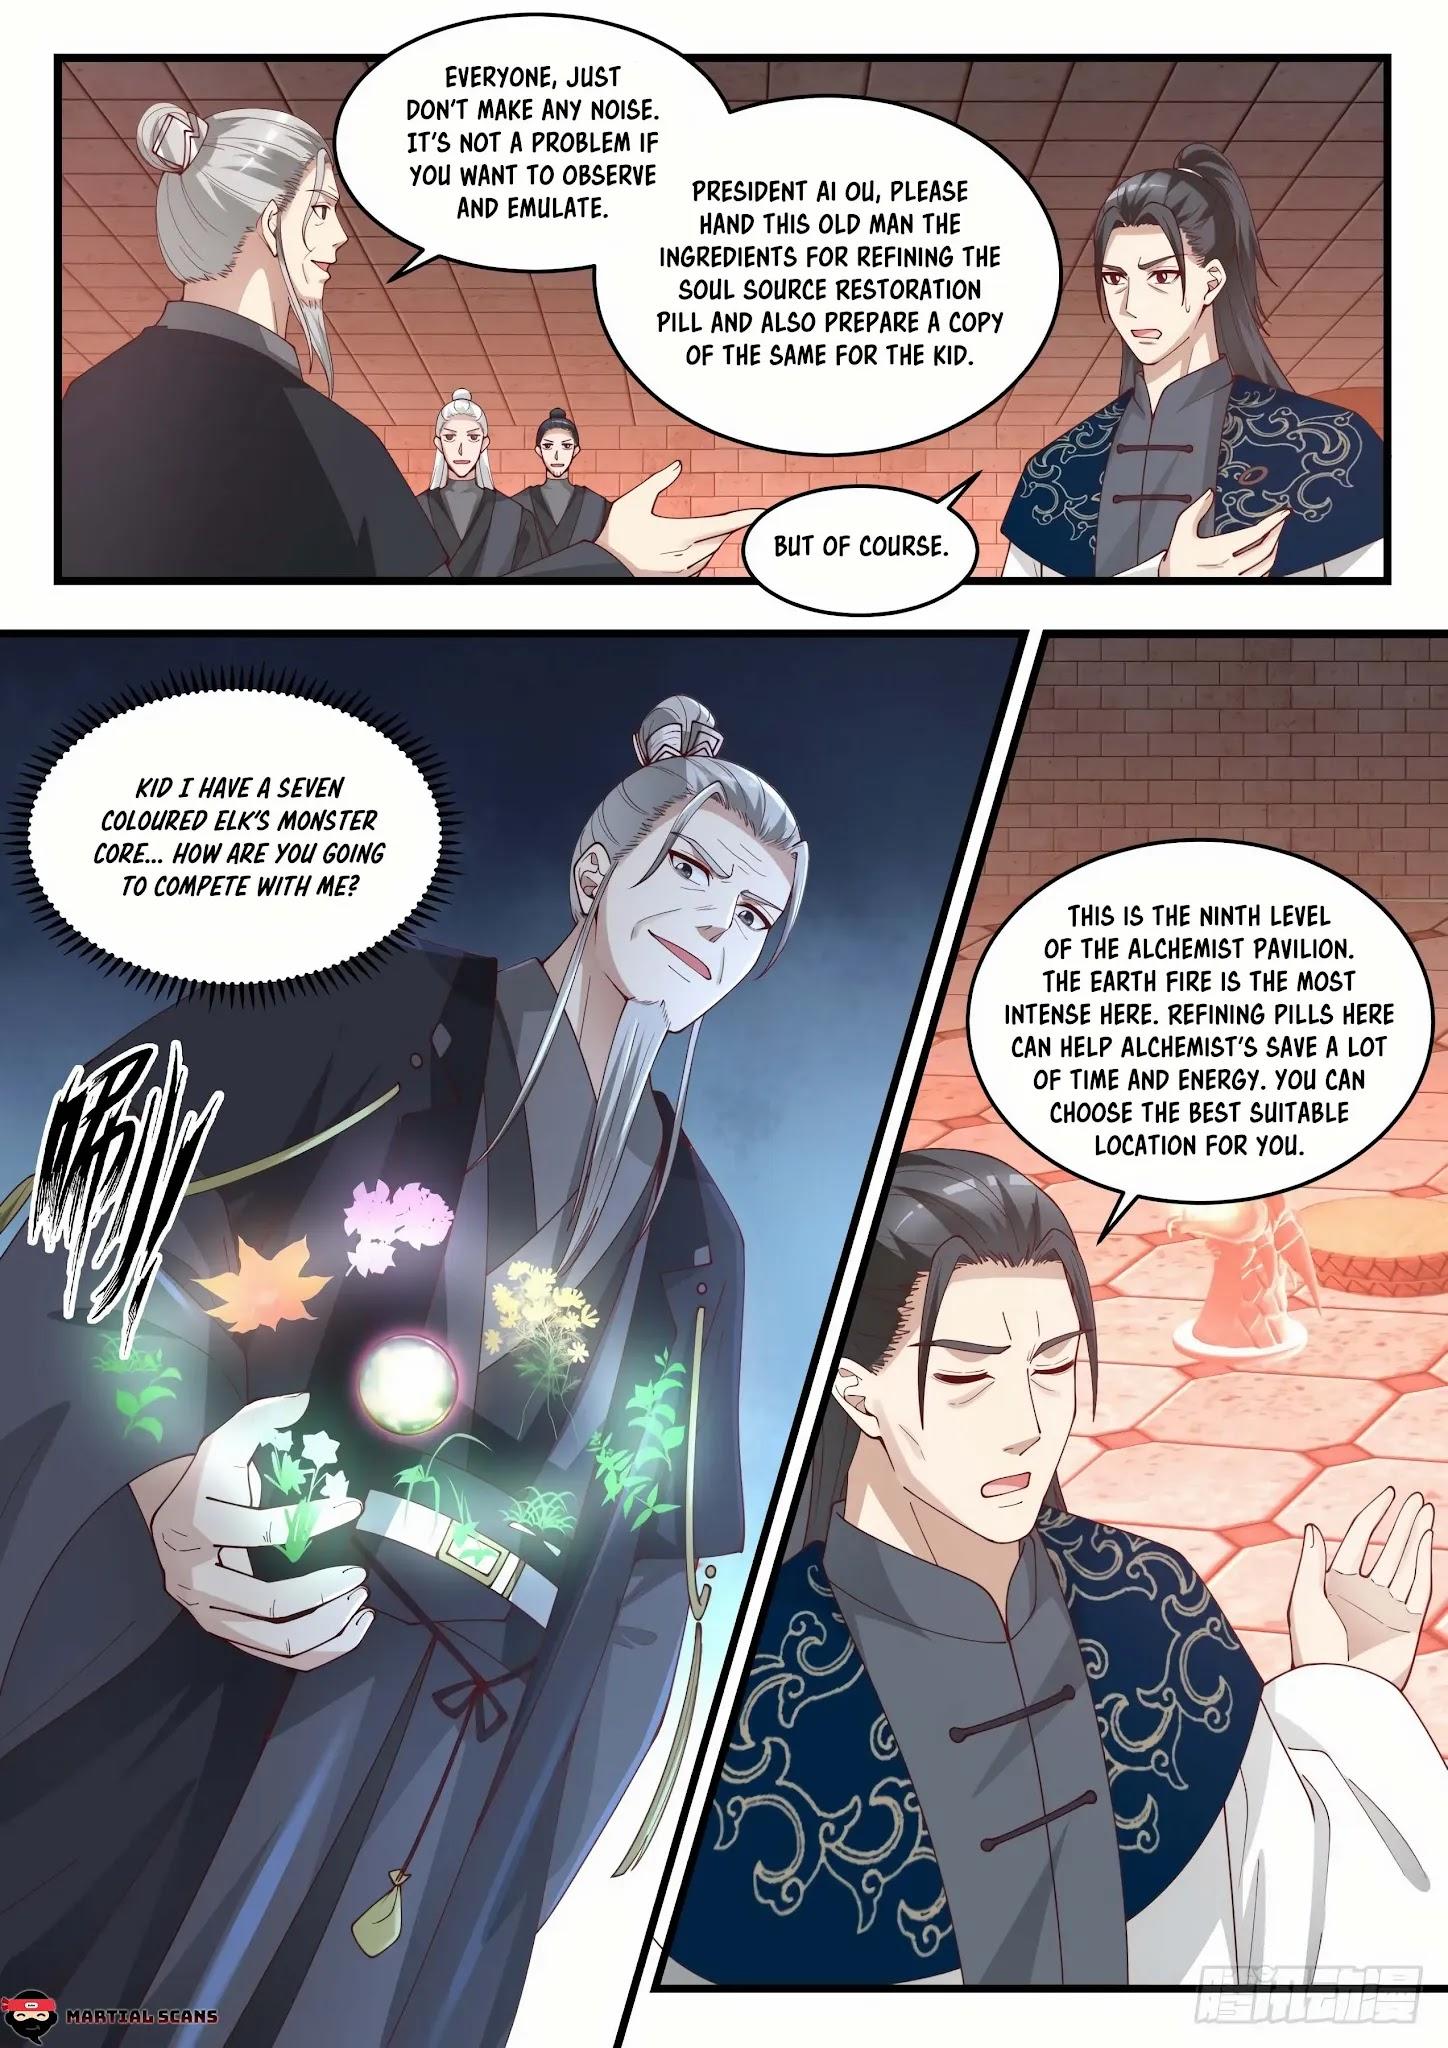 Martial Peak Chapter 1539: Is He Really An Alchemist? page 6 - Mangakakalots.com